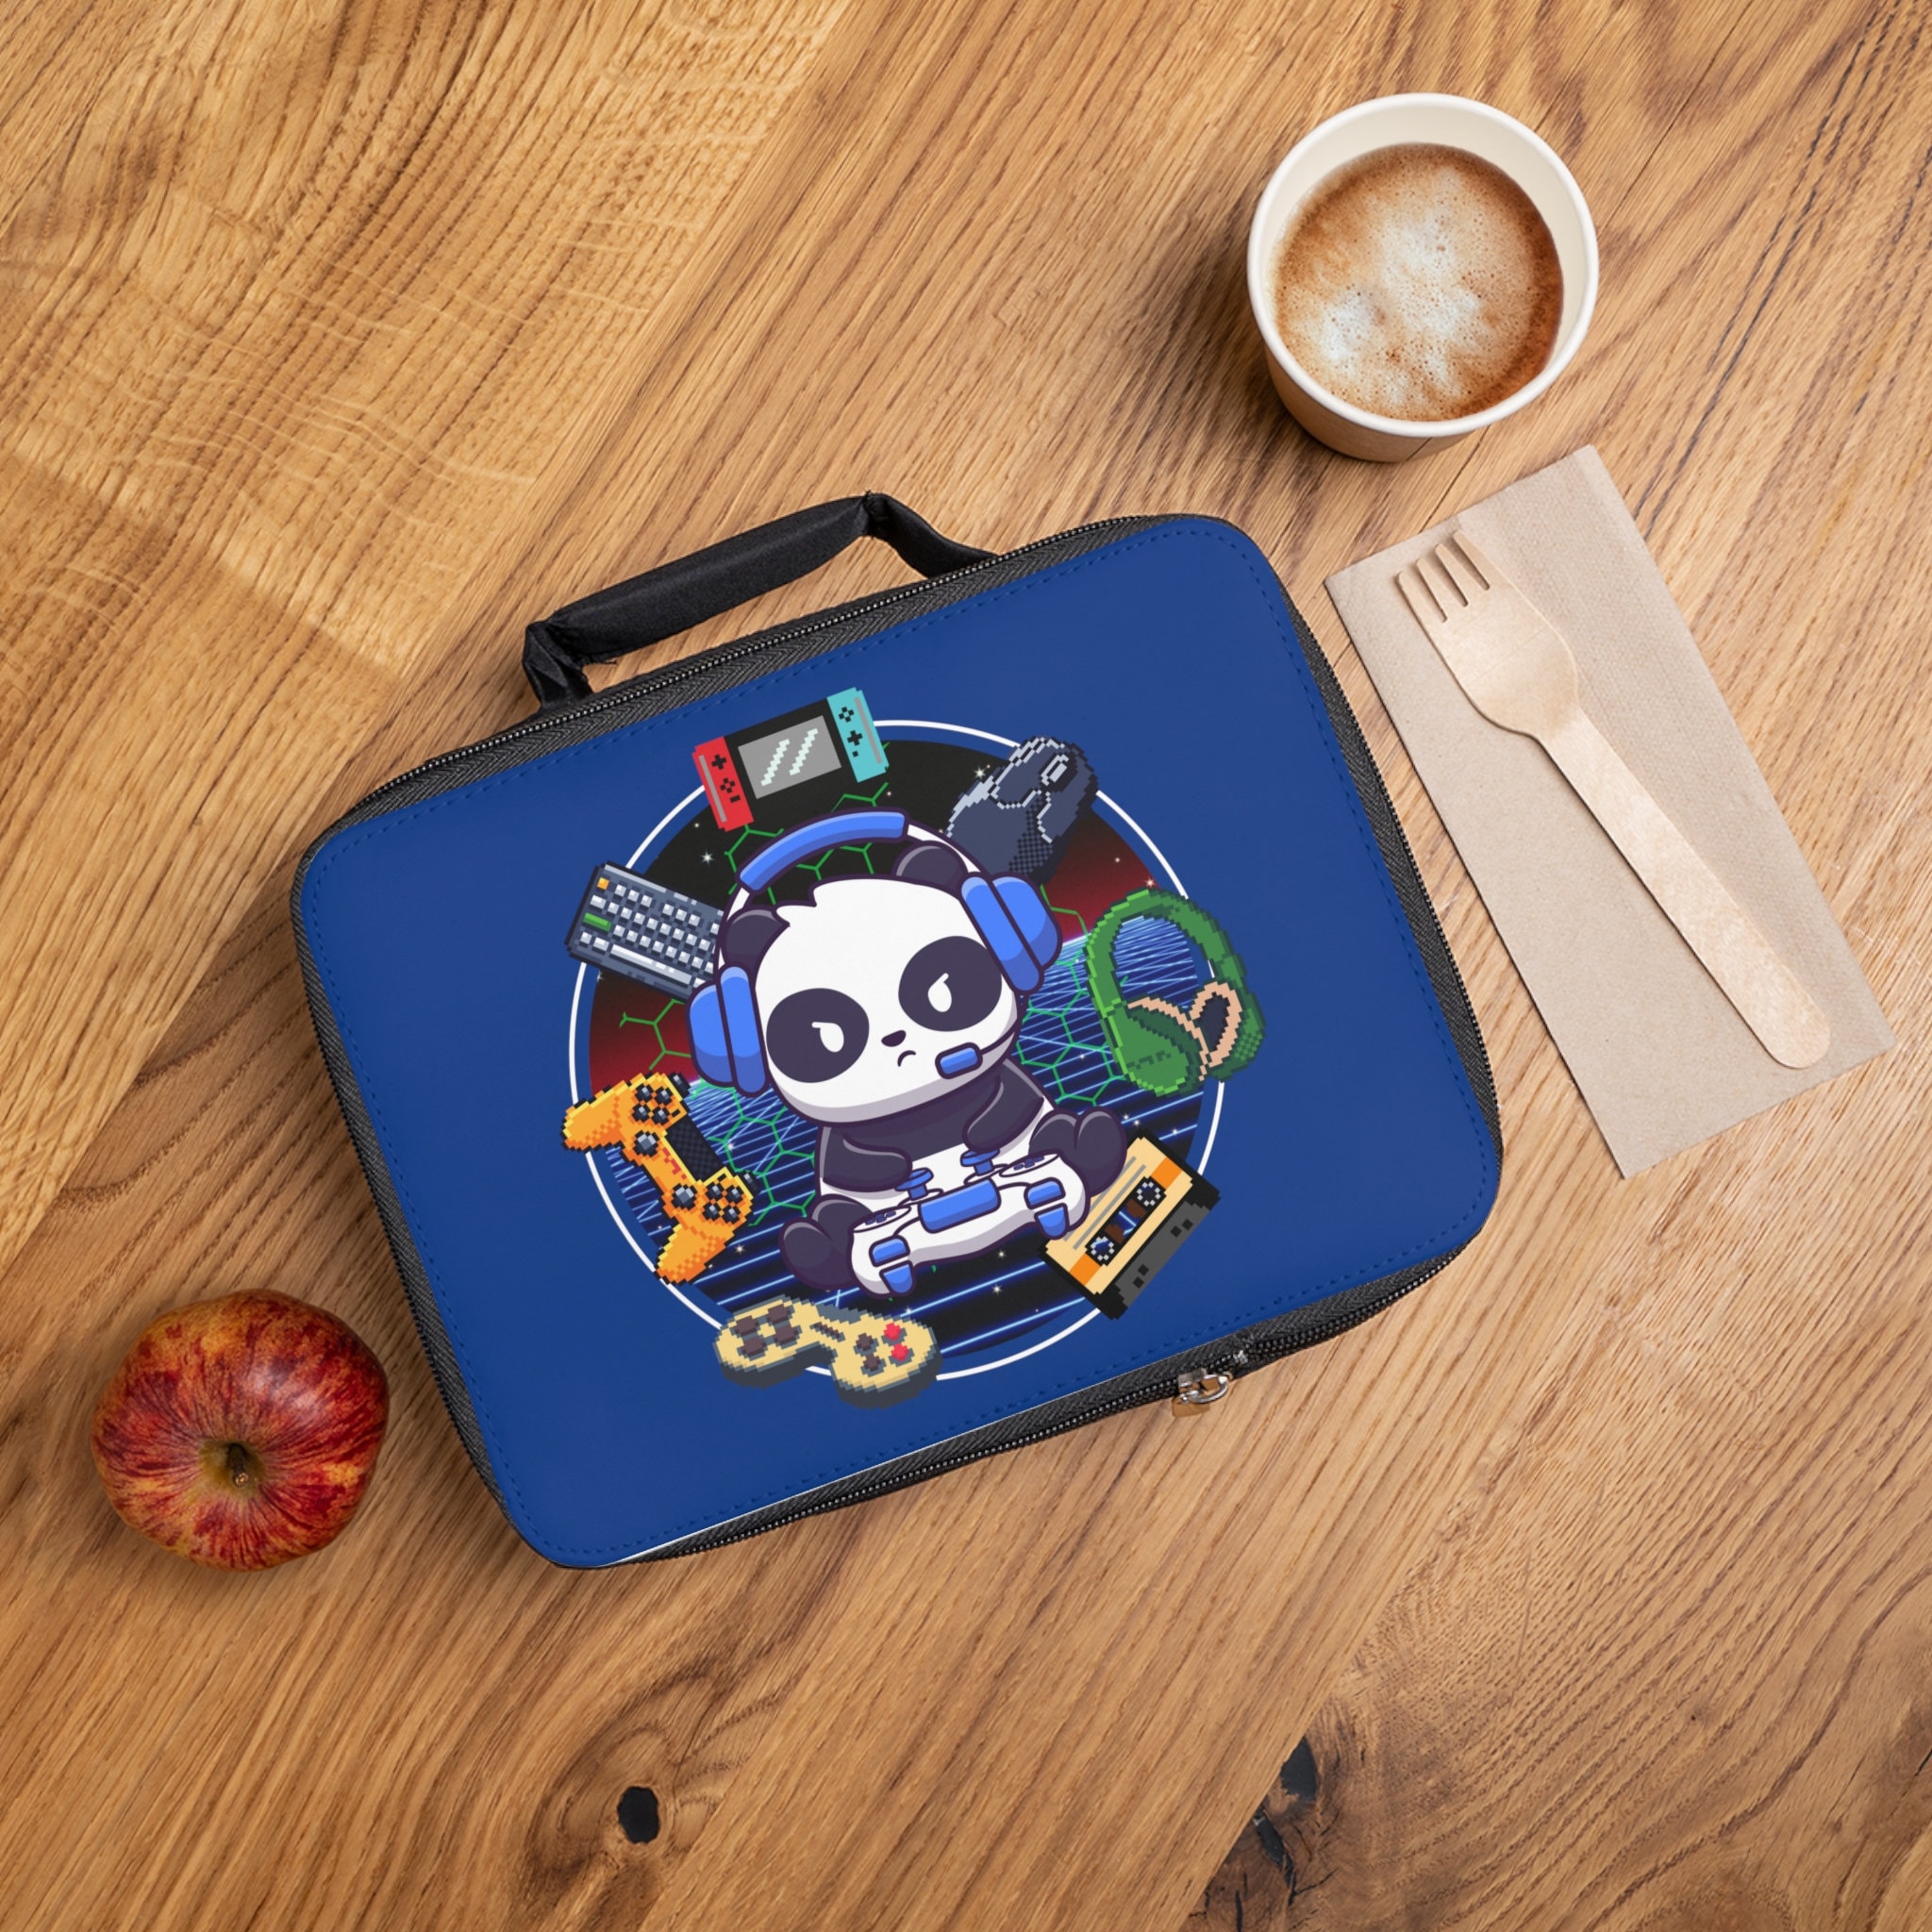 Hairao Game Console Lunch Box, Boy Leather Reusable Lunch Bag, Waterproof  Thermal Insulated Kids Lun…See more Hairao Game Console Lunch Box, Boy